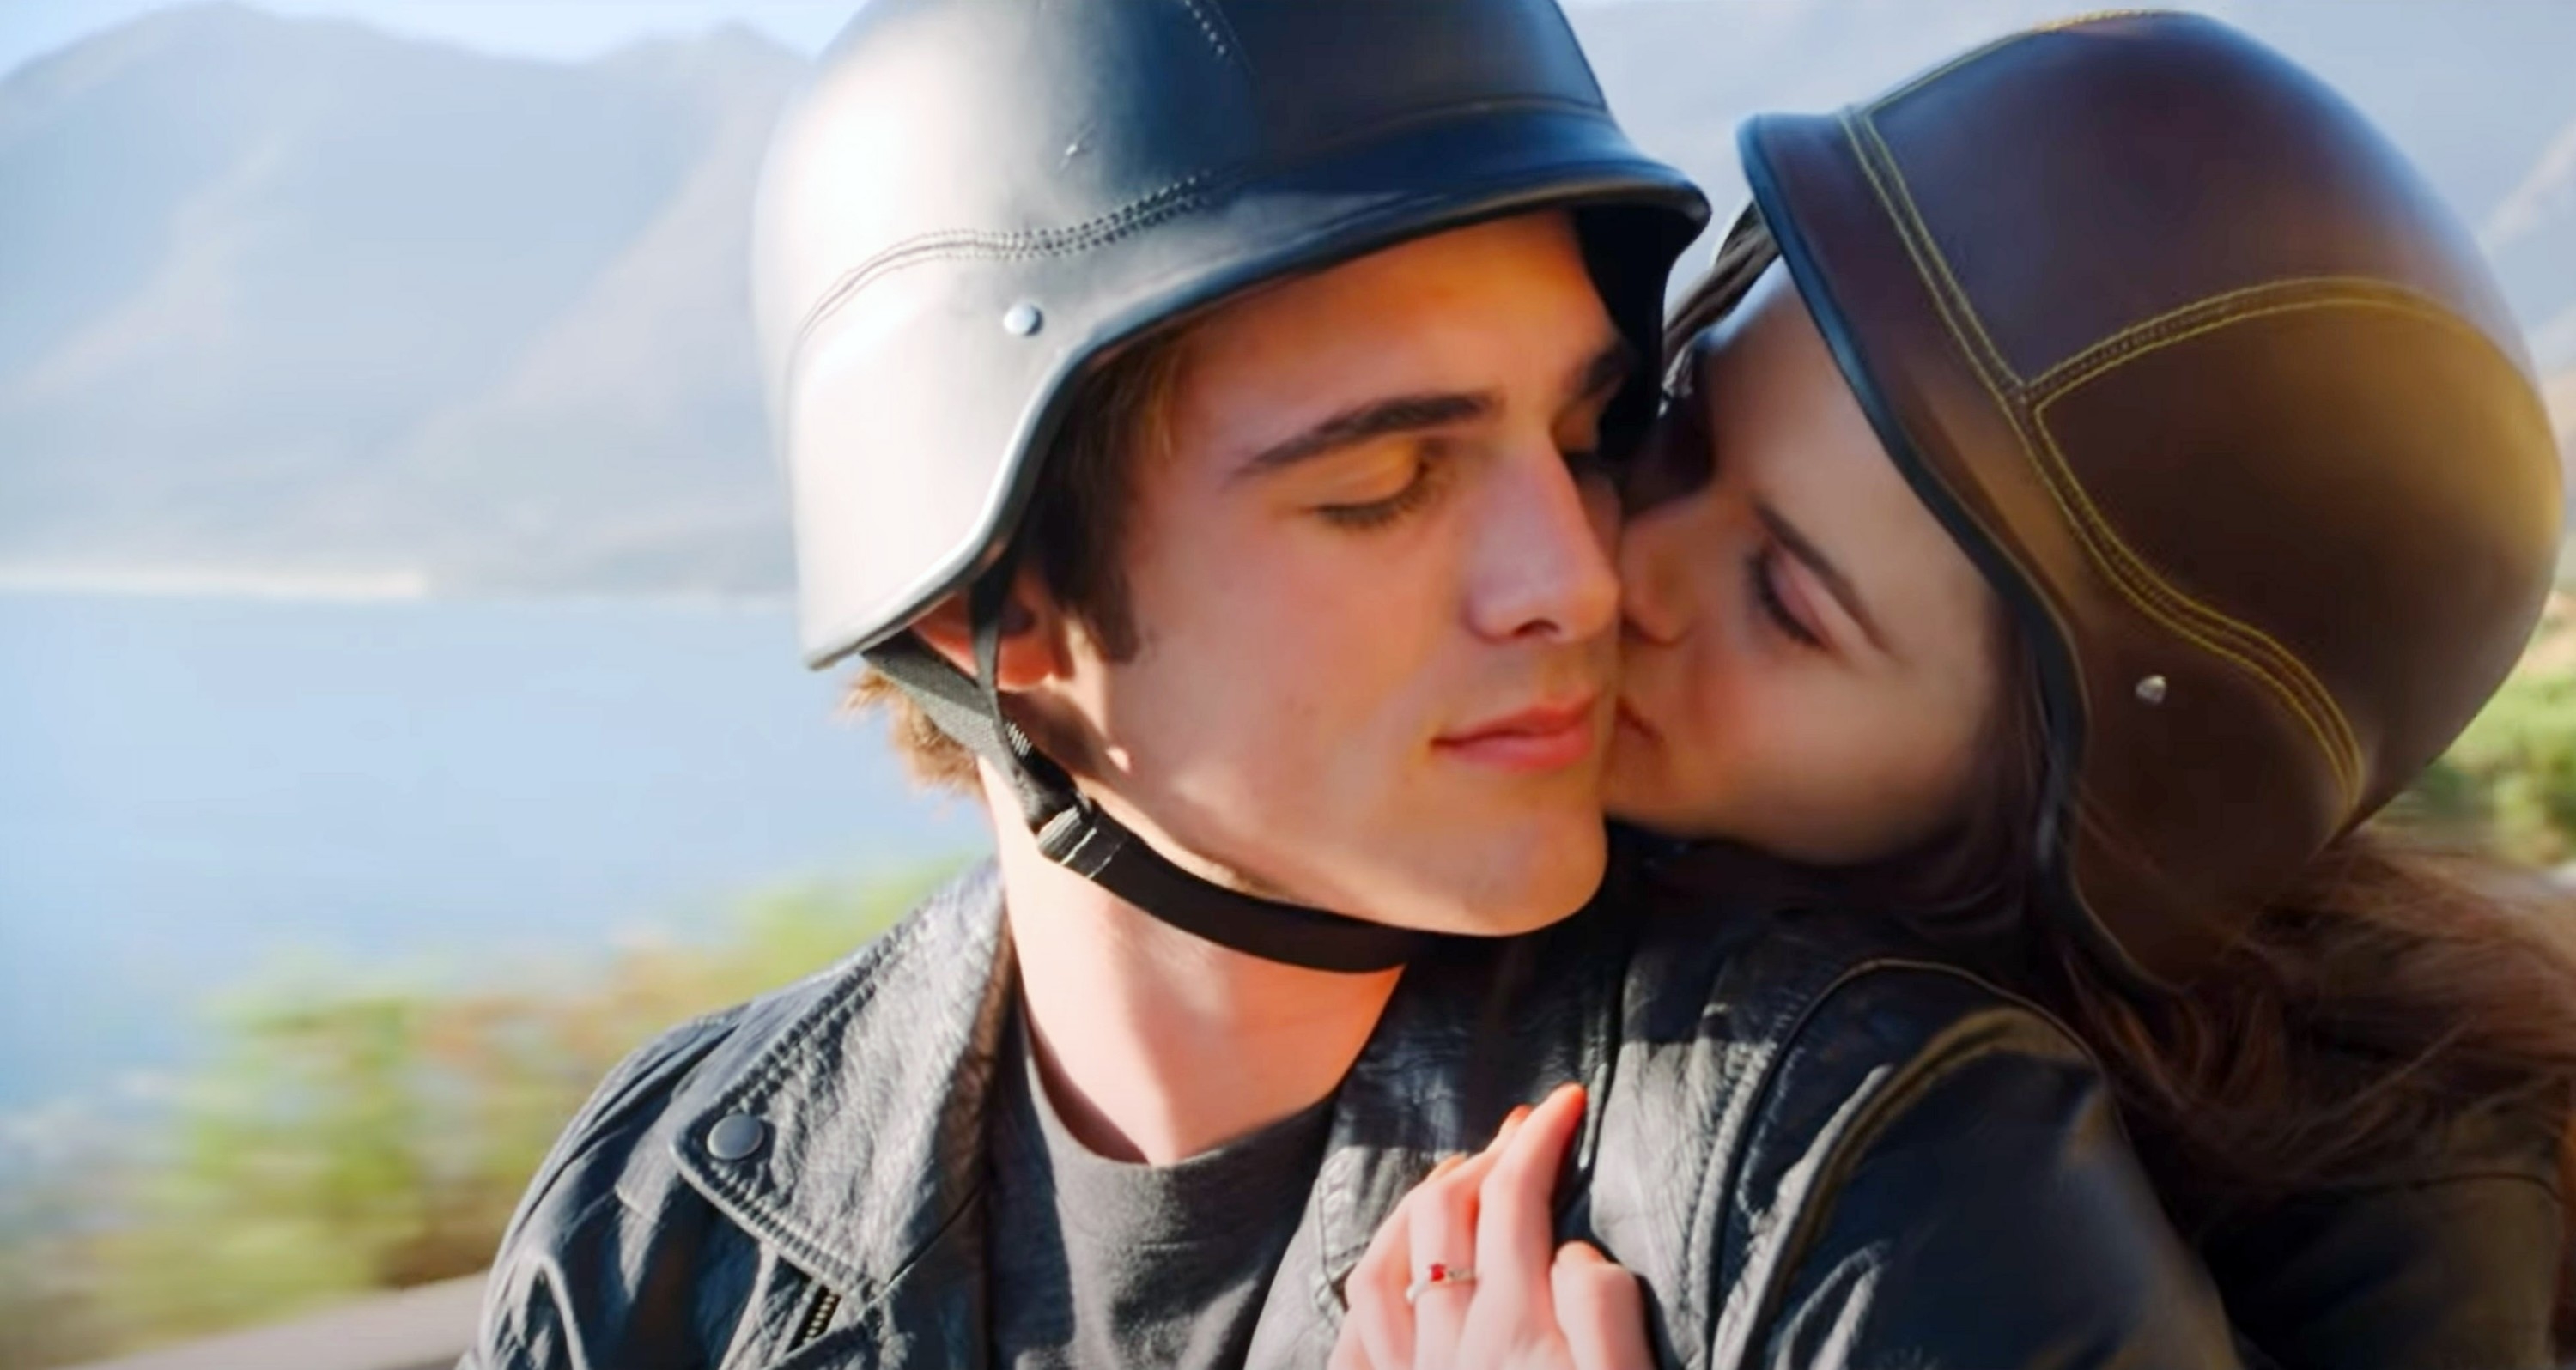 Joey and Jacob in a motorcycle in a scene from &quot;The Kissing Booth&quot;